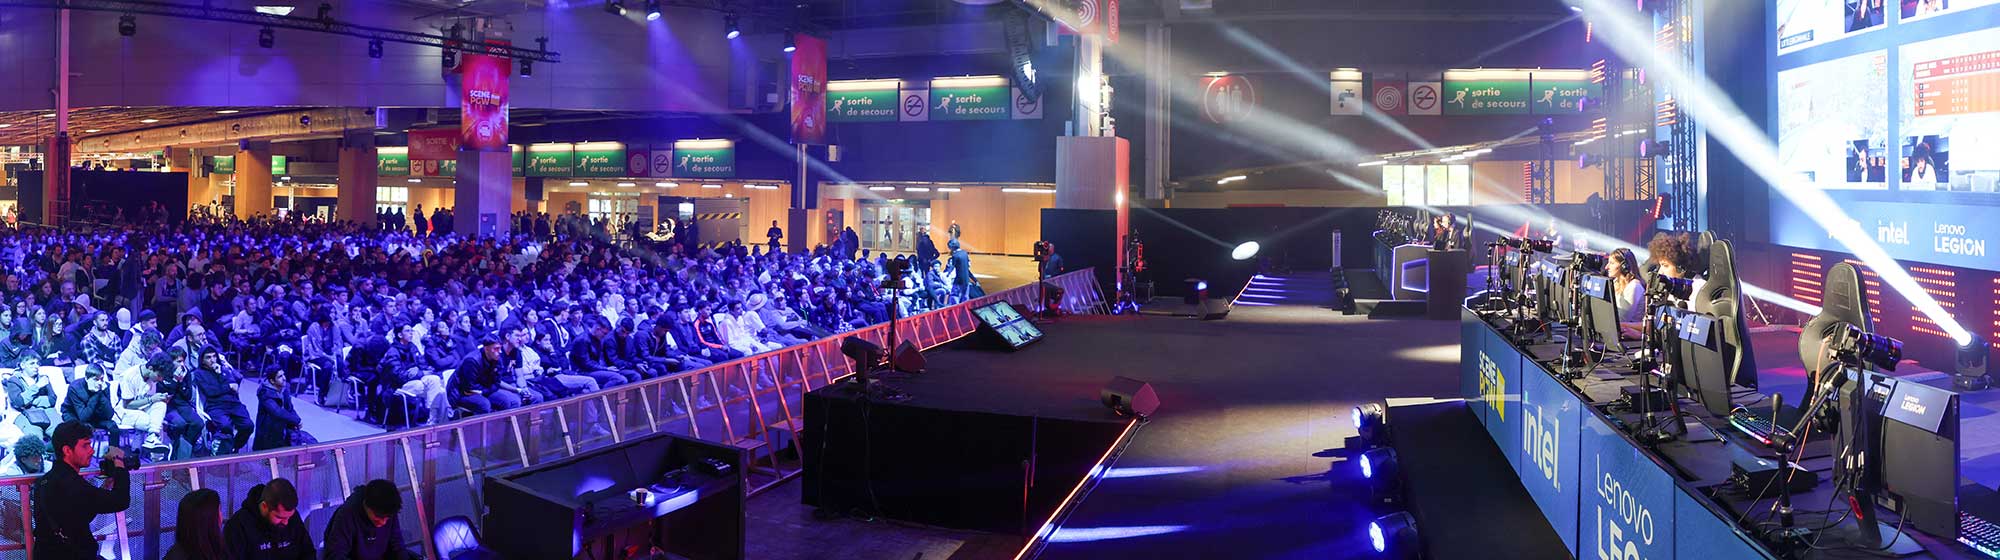 A seated crowd watches gamers play video games on a stage with a giant screen